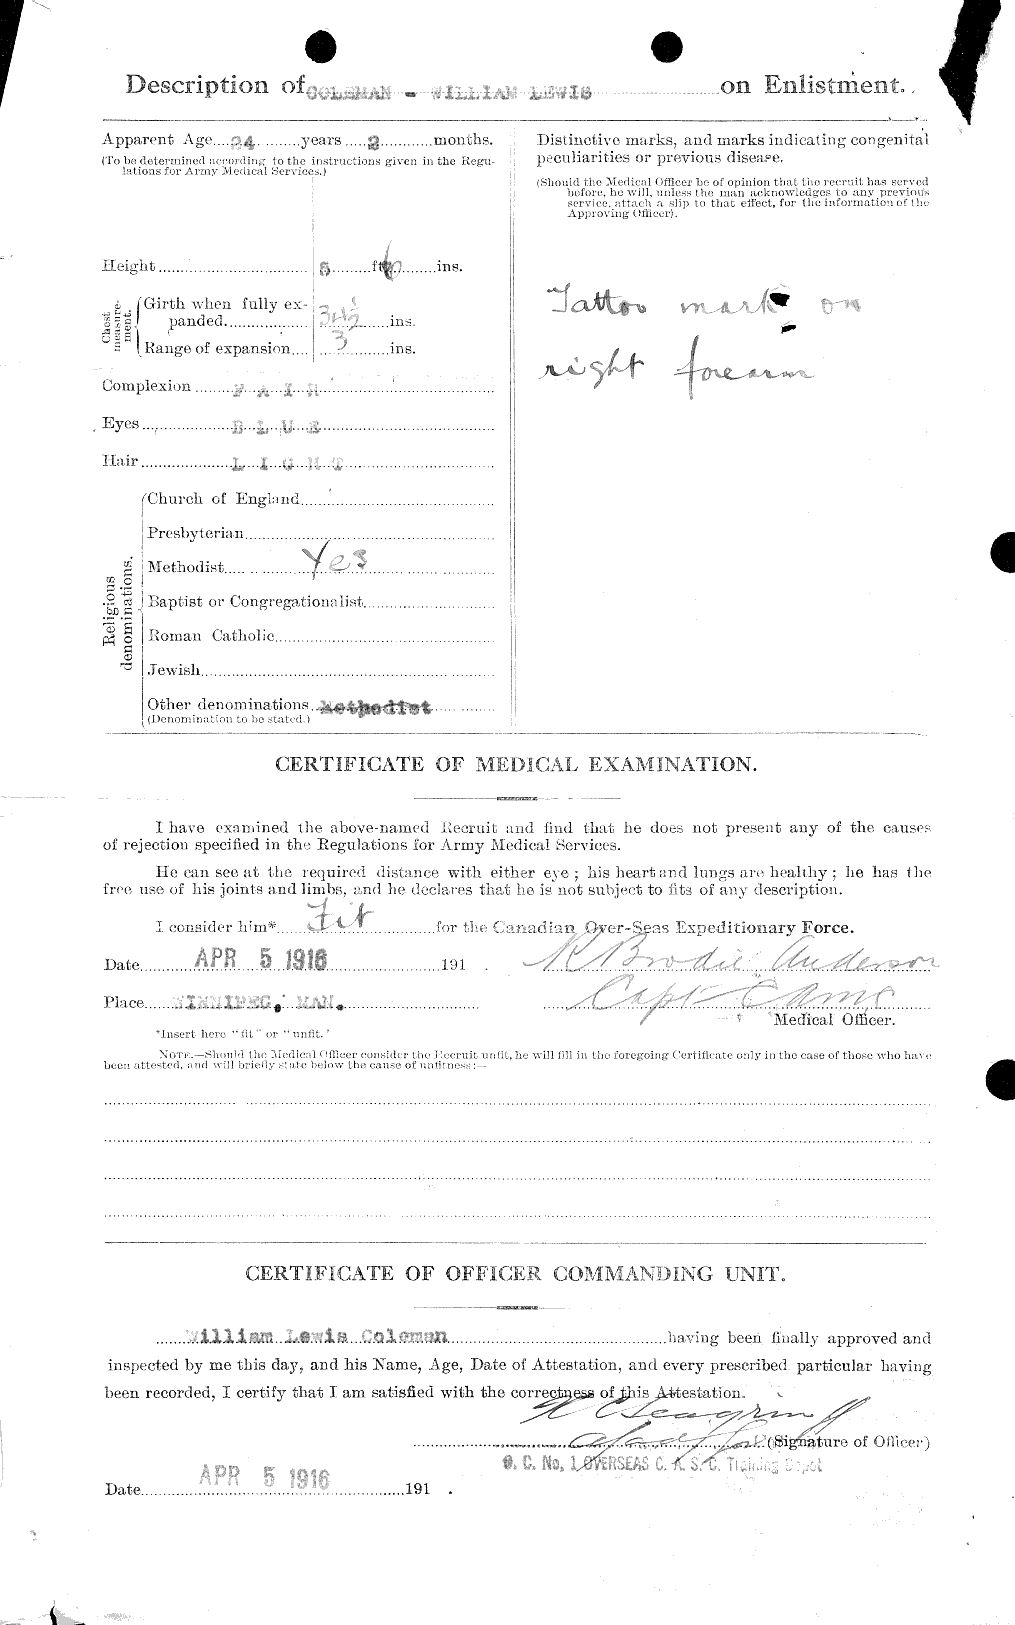 Personnel Records of the First World War - CEF 028322b